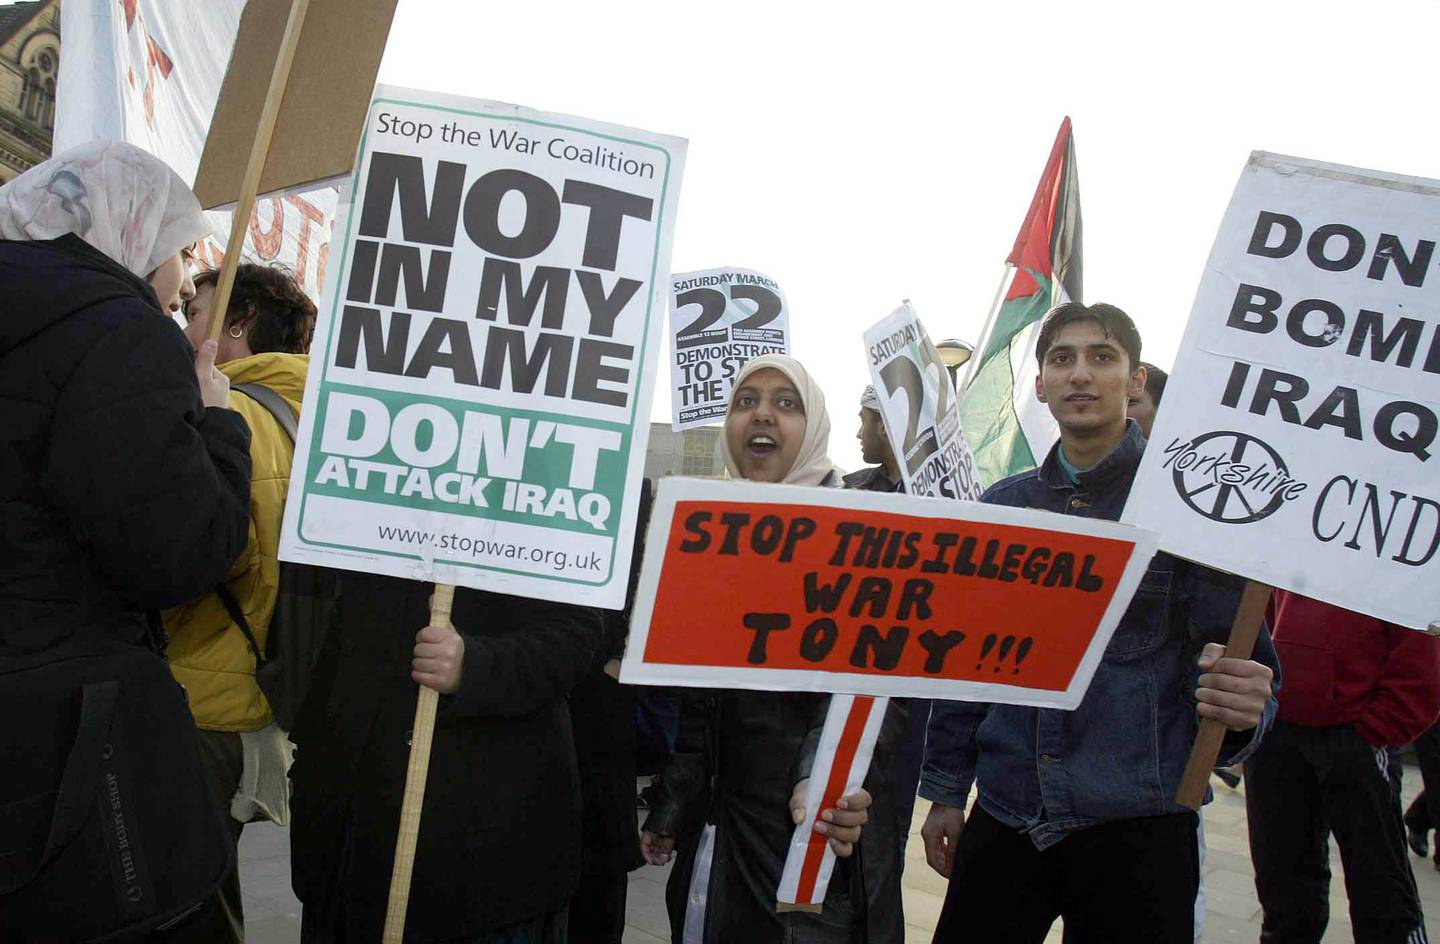 Anti-war protesters gather in Bradford on the first day of the 2003 invasion of Iraq. PA